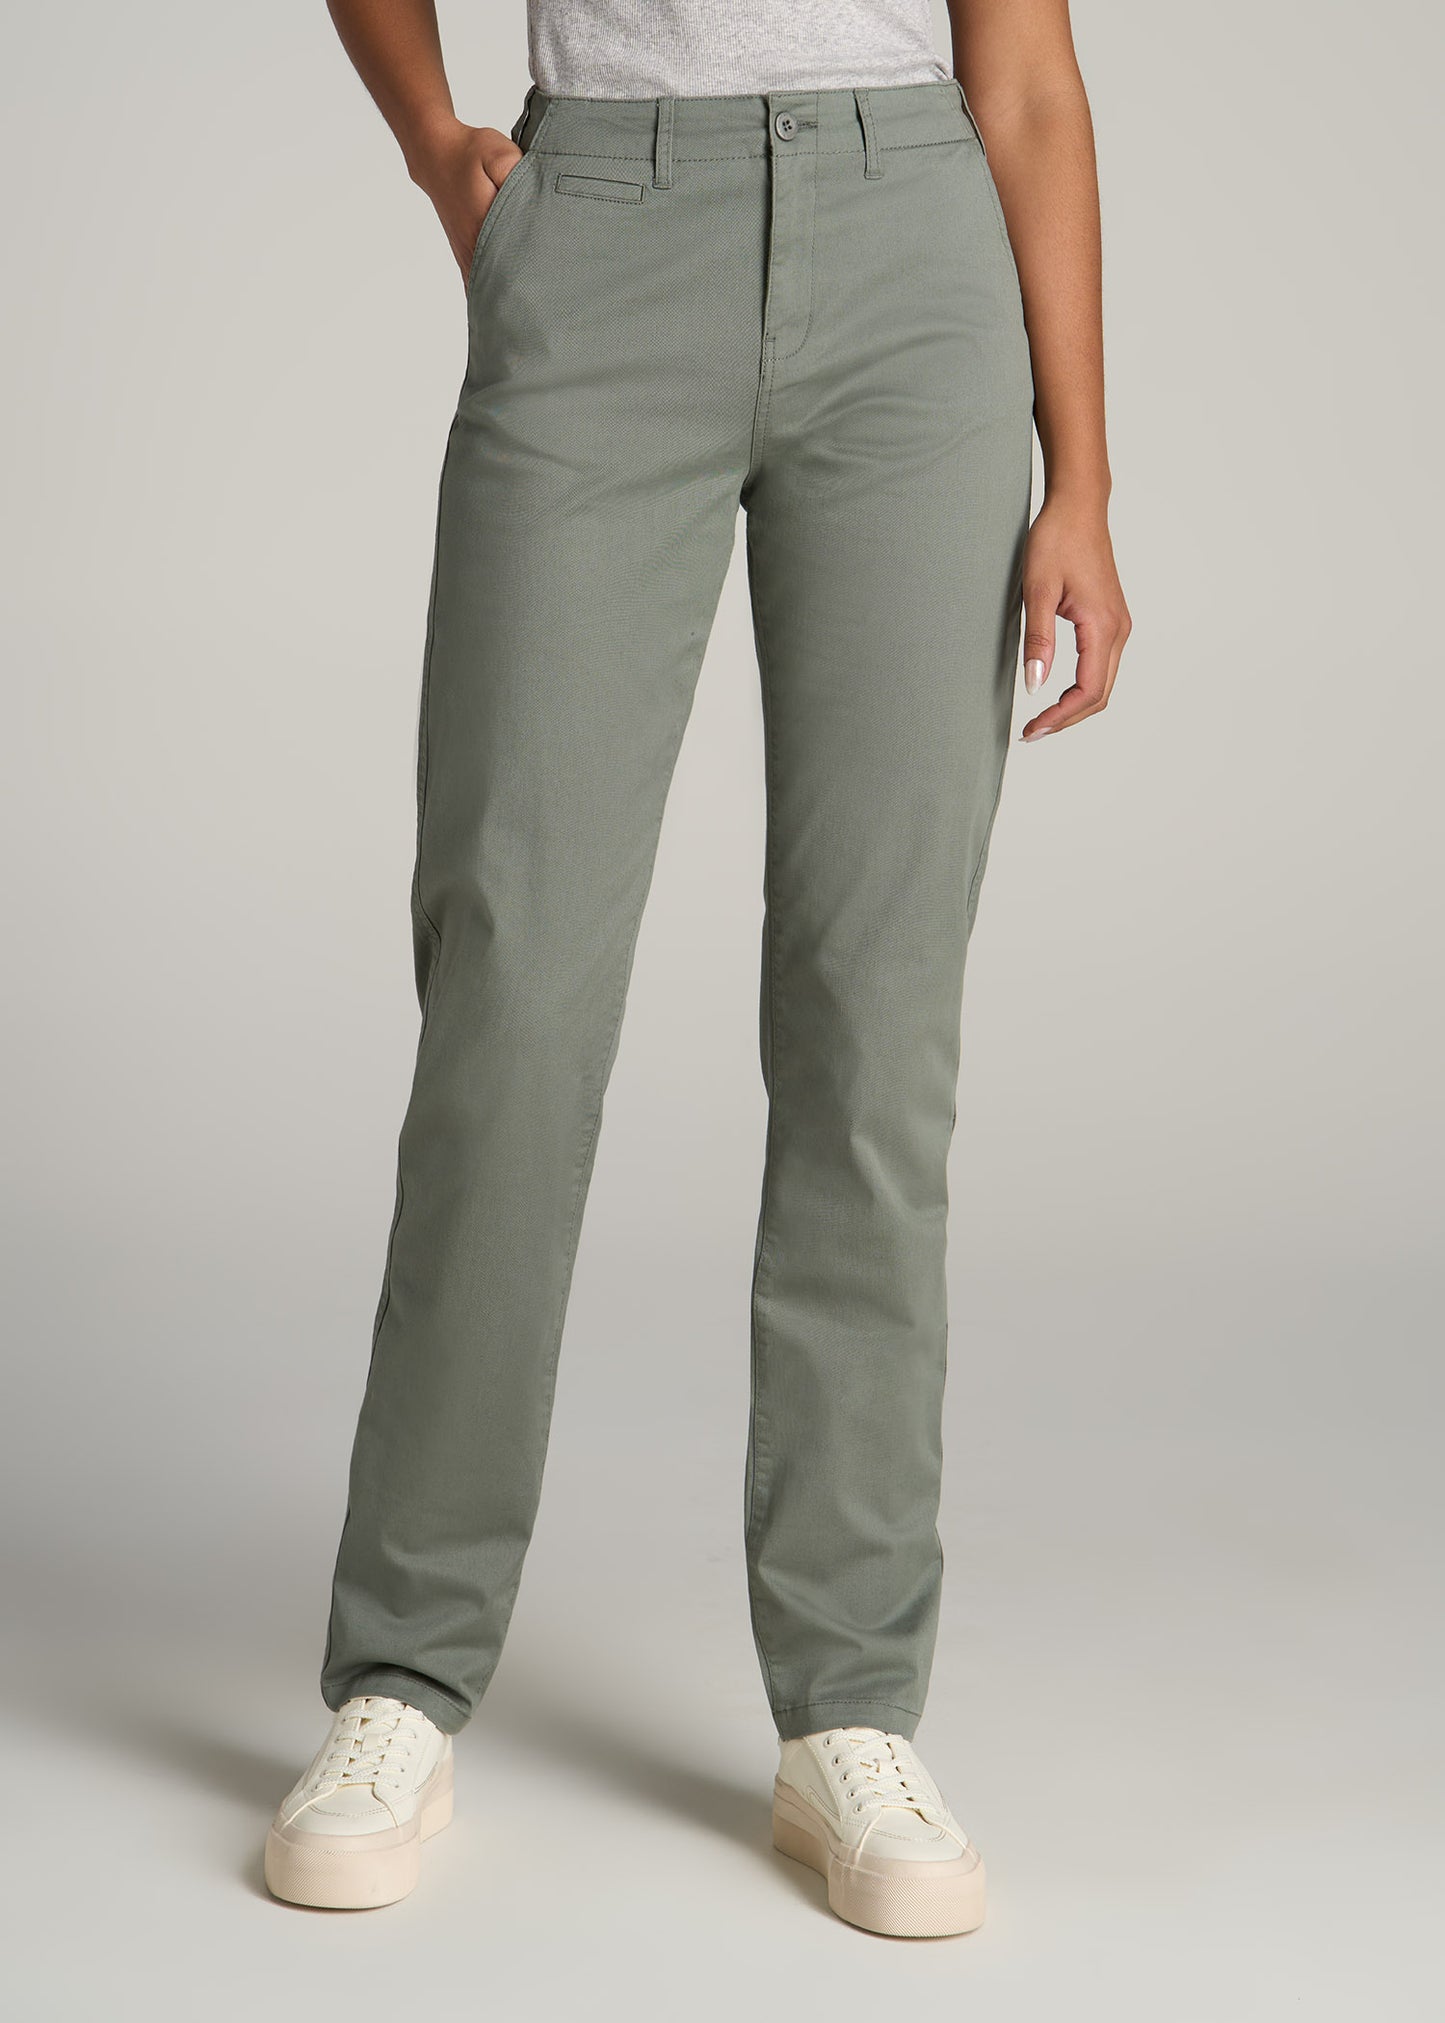 Women's High-Rise Slim Straight Fit Ankle Chino Pants - A New Day